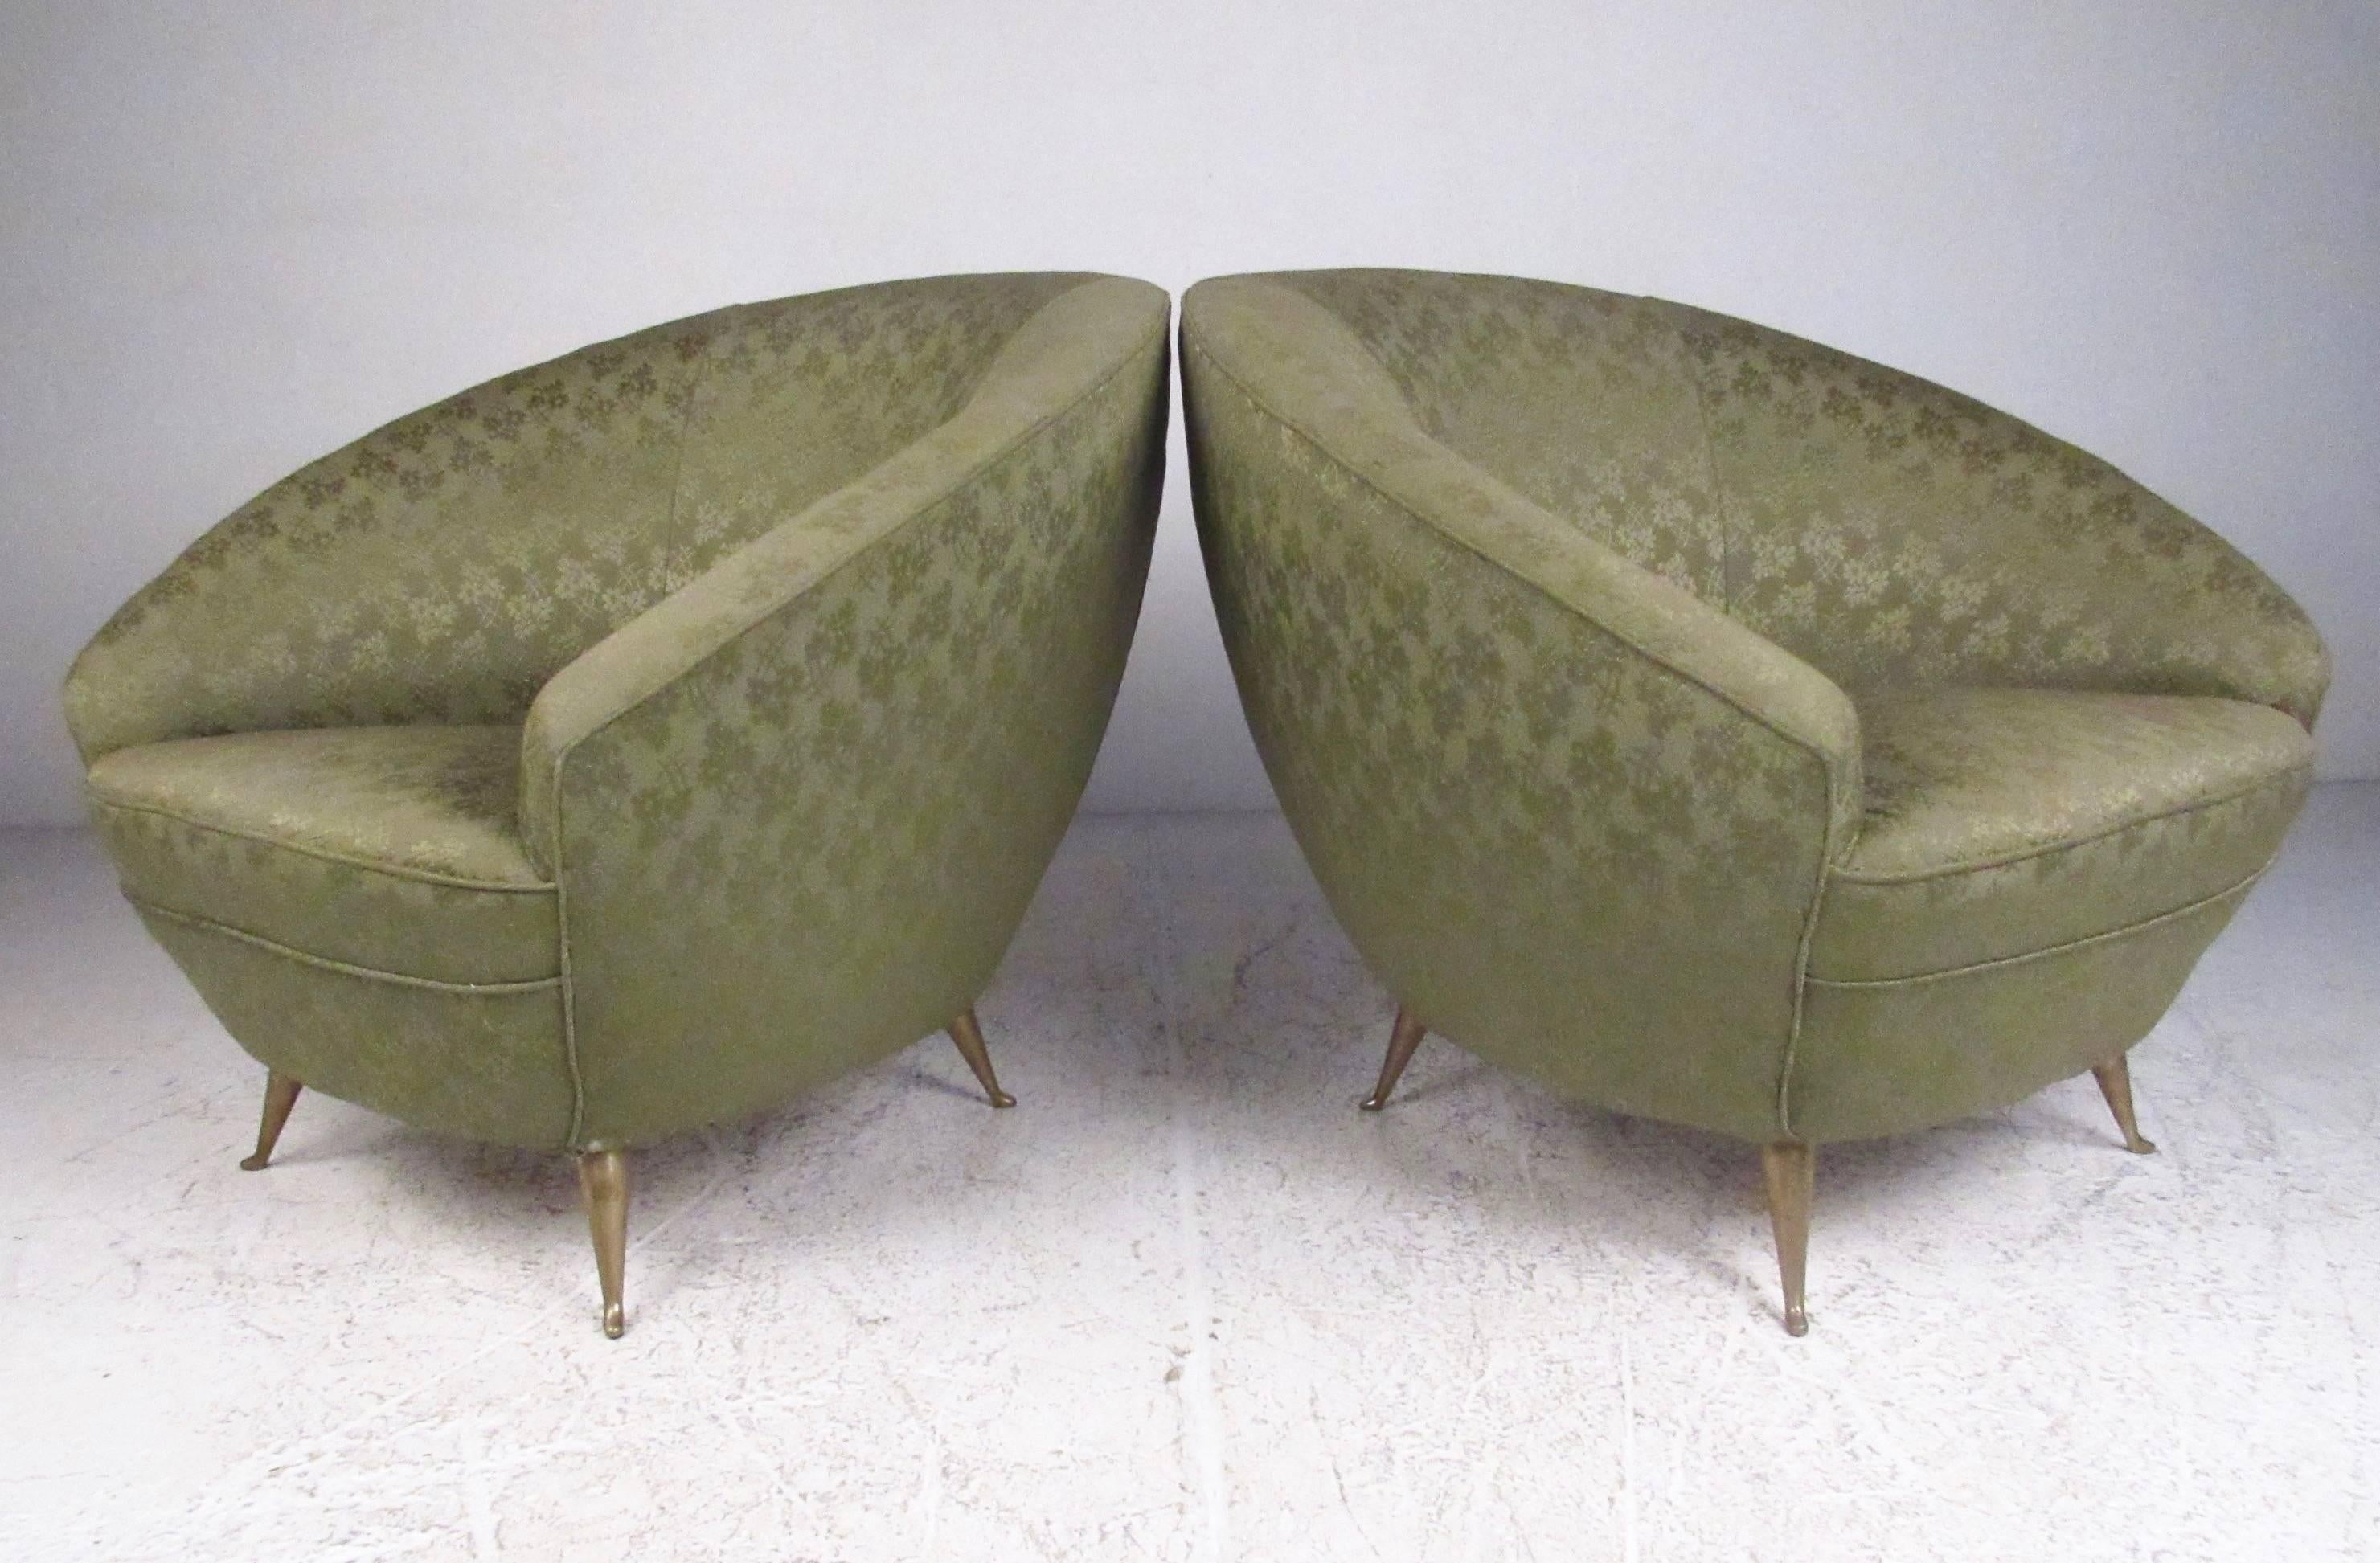 This vintage pair of Italian modern lounge chairs features elegant sculpted seats with stylish vintage upholstery. The unique and comfortable seat backs paired with tapered brass legs add to the Italian Modern design in the style of Ico Parisi.